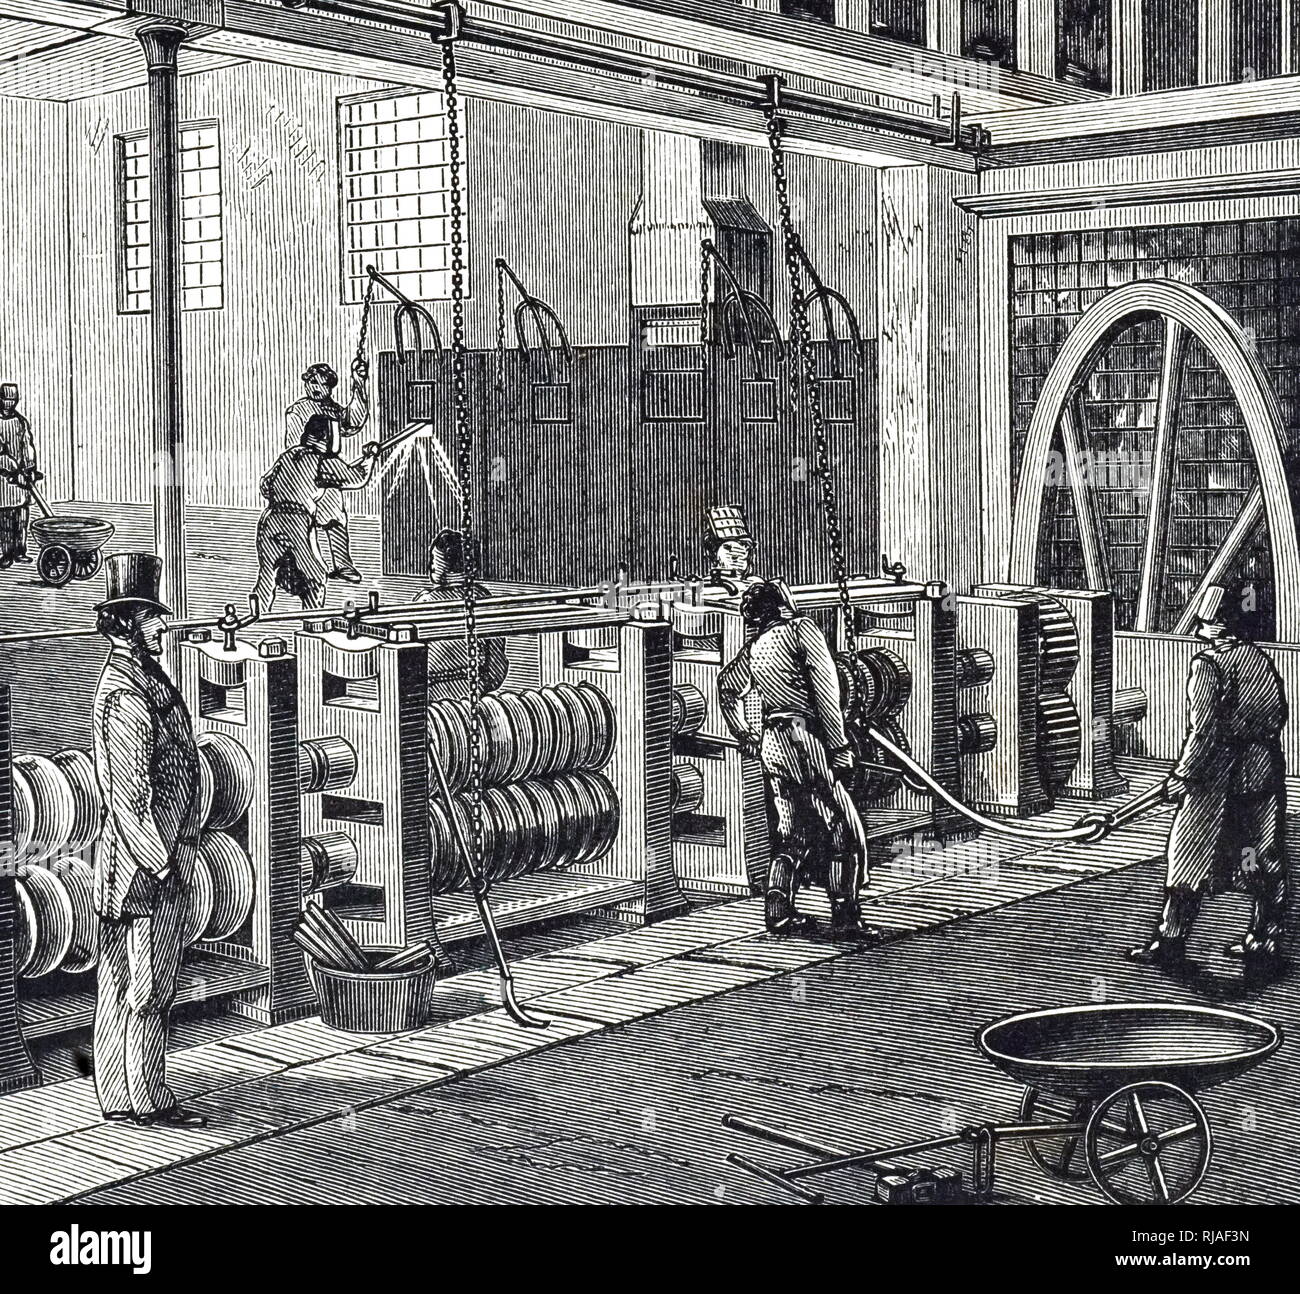 An engraving depicting the process of making wrought iron: rolling blooms into bars - Dowlais Ironworks, an ironworks and steelworks located at Dowlais near Merthyr Tydfil, in Wales. Dated 19th century Stock Photo